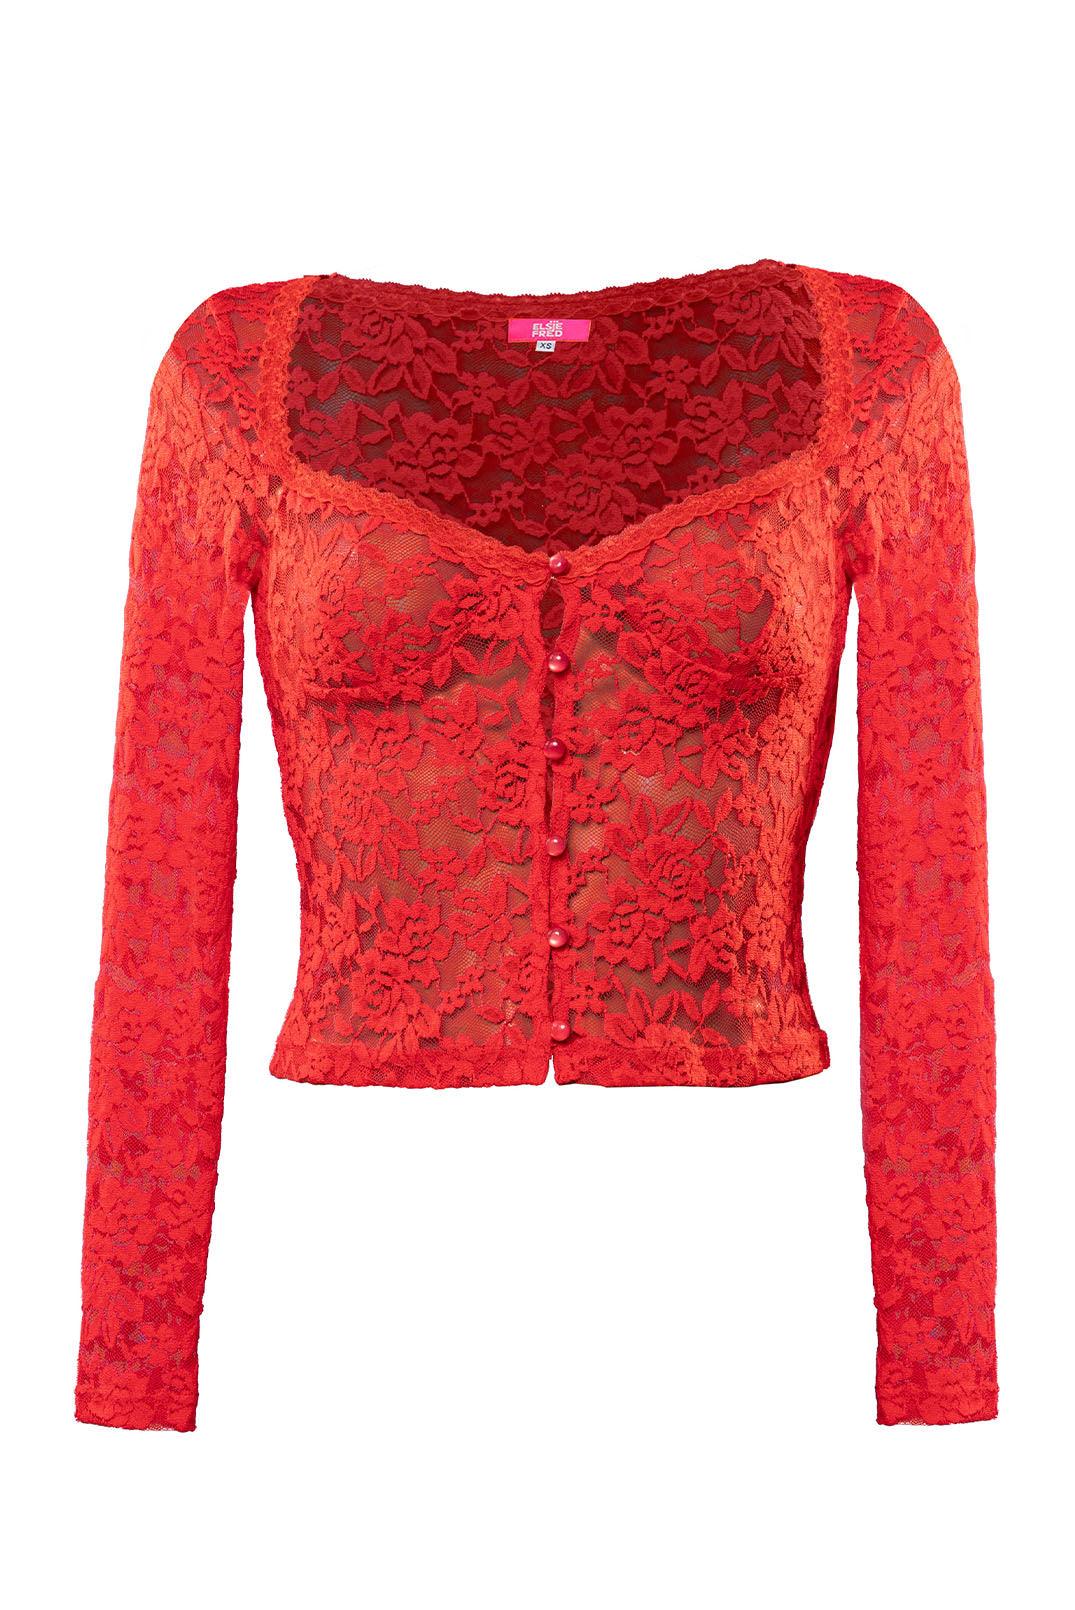 Red Sonja Lace Sheer Long Sleeve Button Top - Elsie & Fred